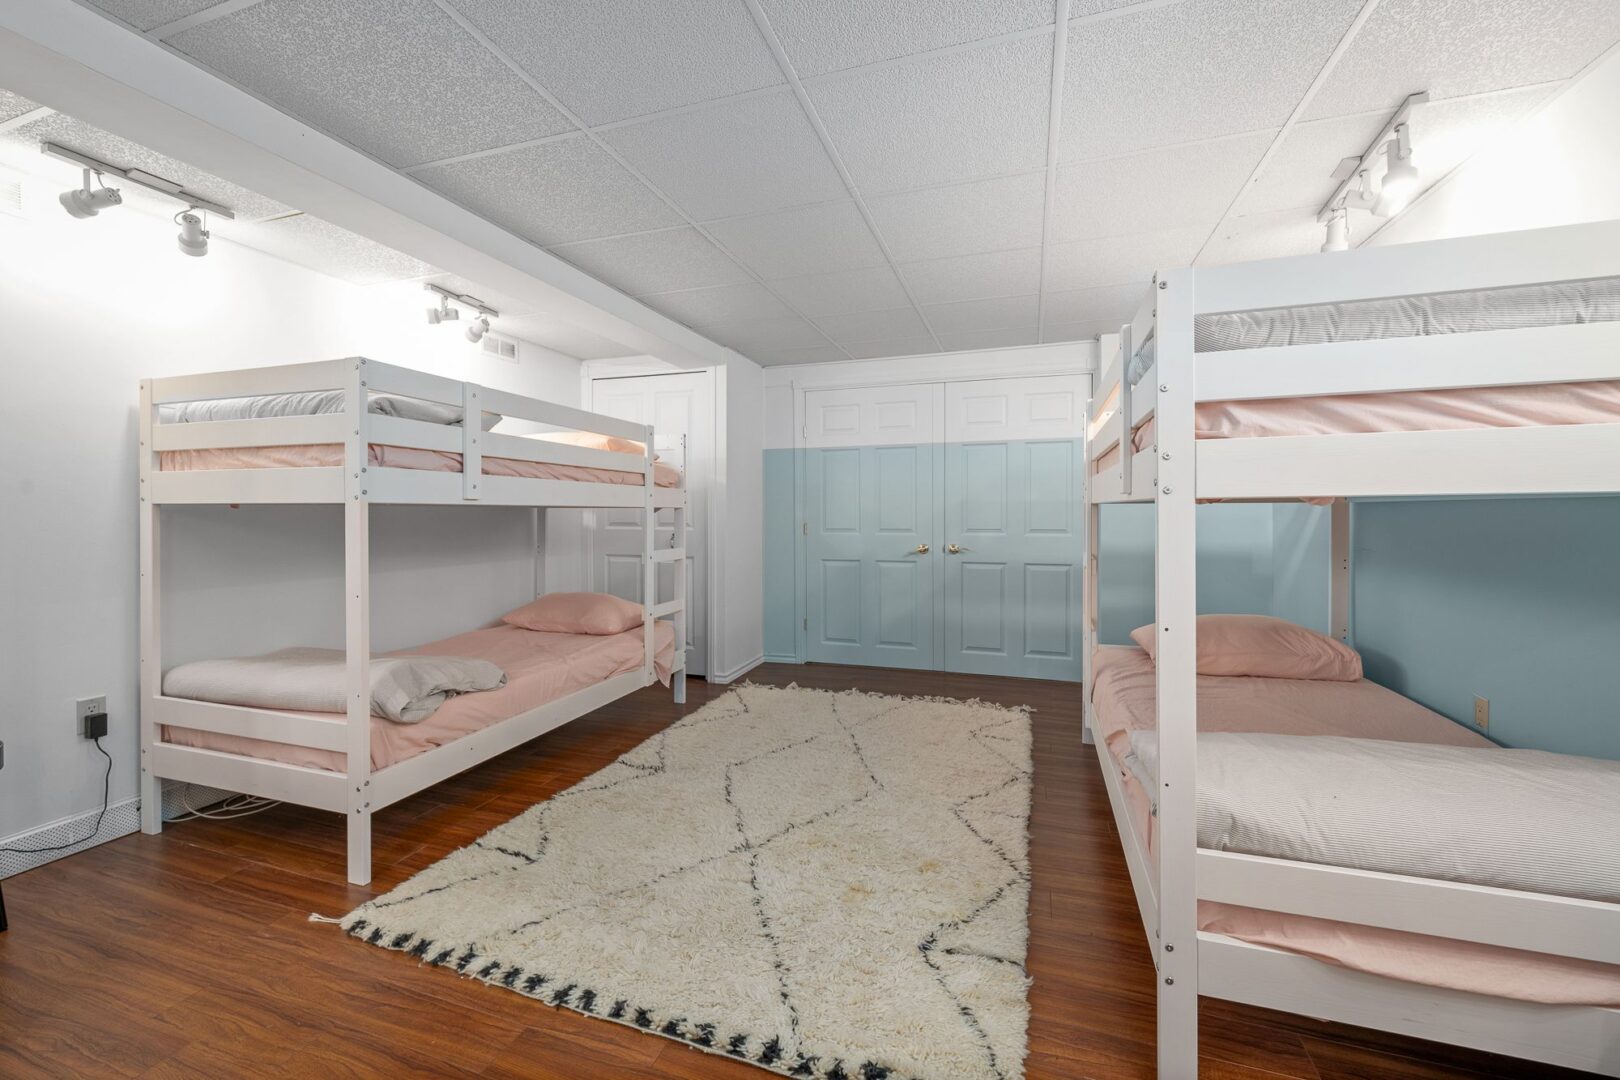 Two bunk beds in a finished basement area with light blue walls.